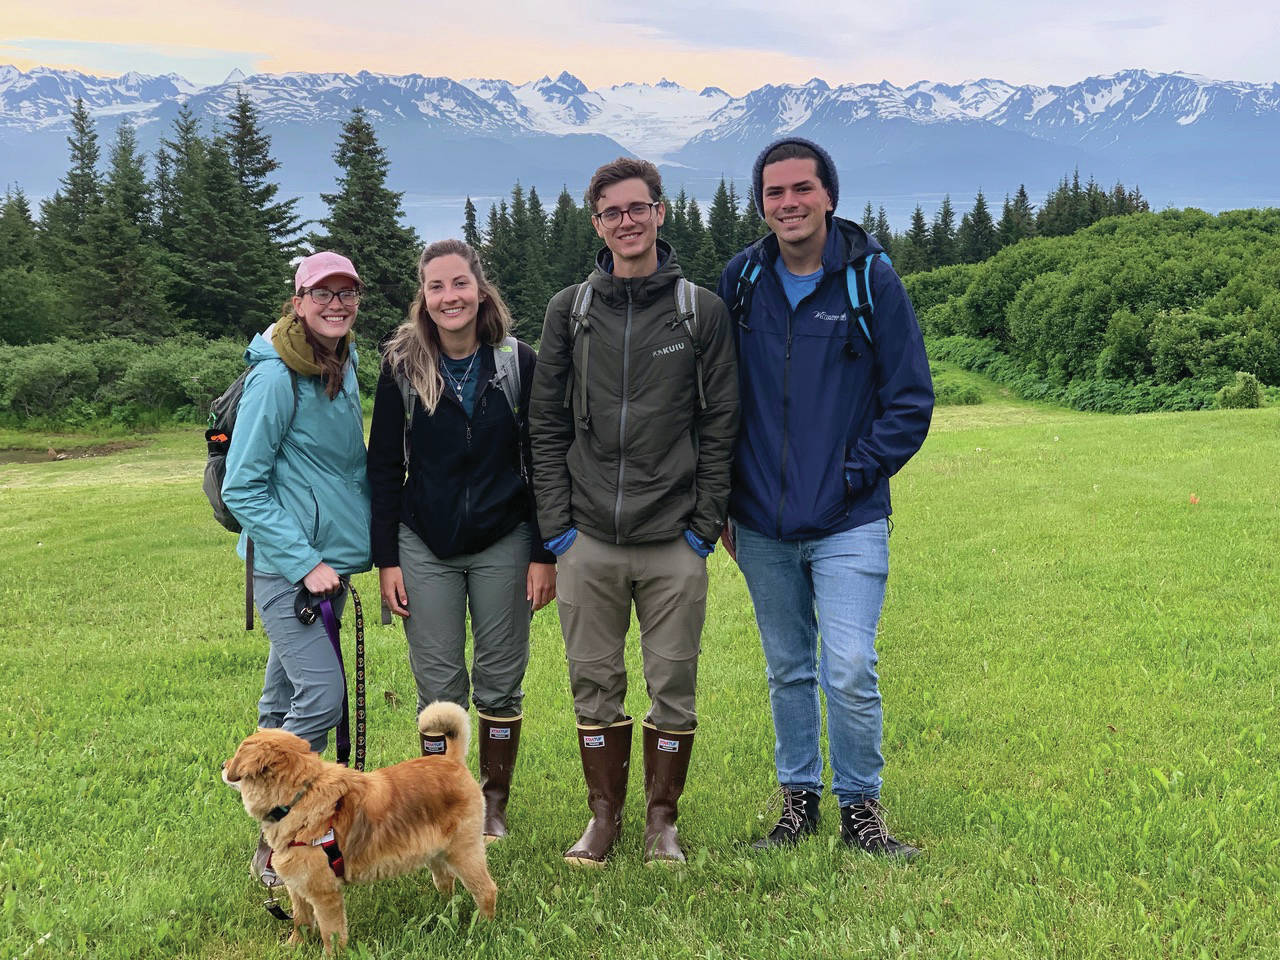 From left to right, Ashley Laukhuf, Kristin Armstrong, Nick Hansen and Kyle Barnes pose for a photo earlier this month on Inspiration Ridge Preserve near Homer, Alaska. The graduate students with the University of Michigan, Ann Arbor, were doing research with the School for Environment and Sustainability. (Photo by Nina Faust)